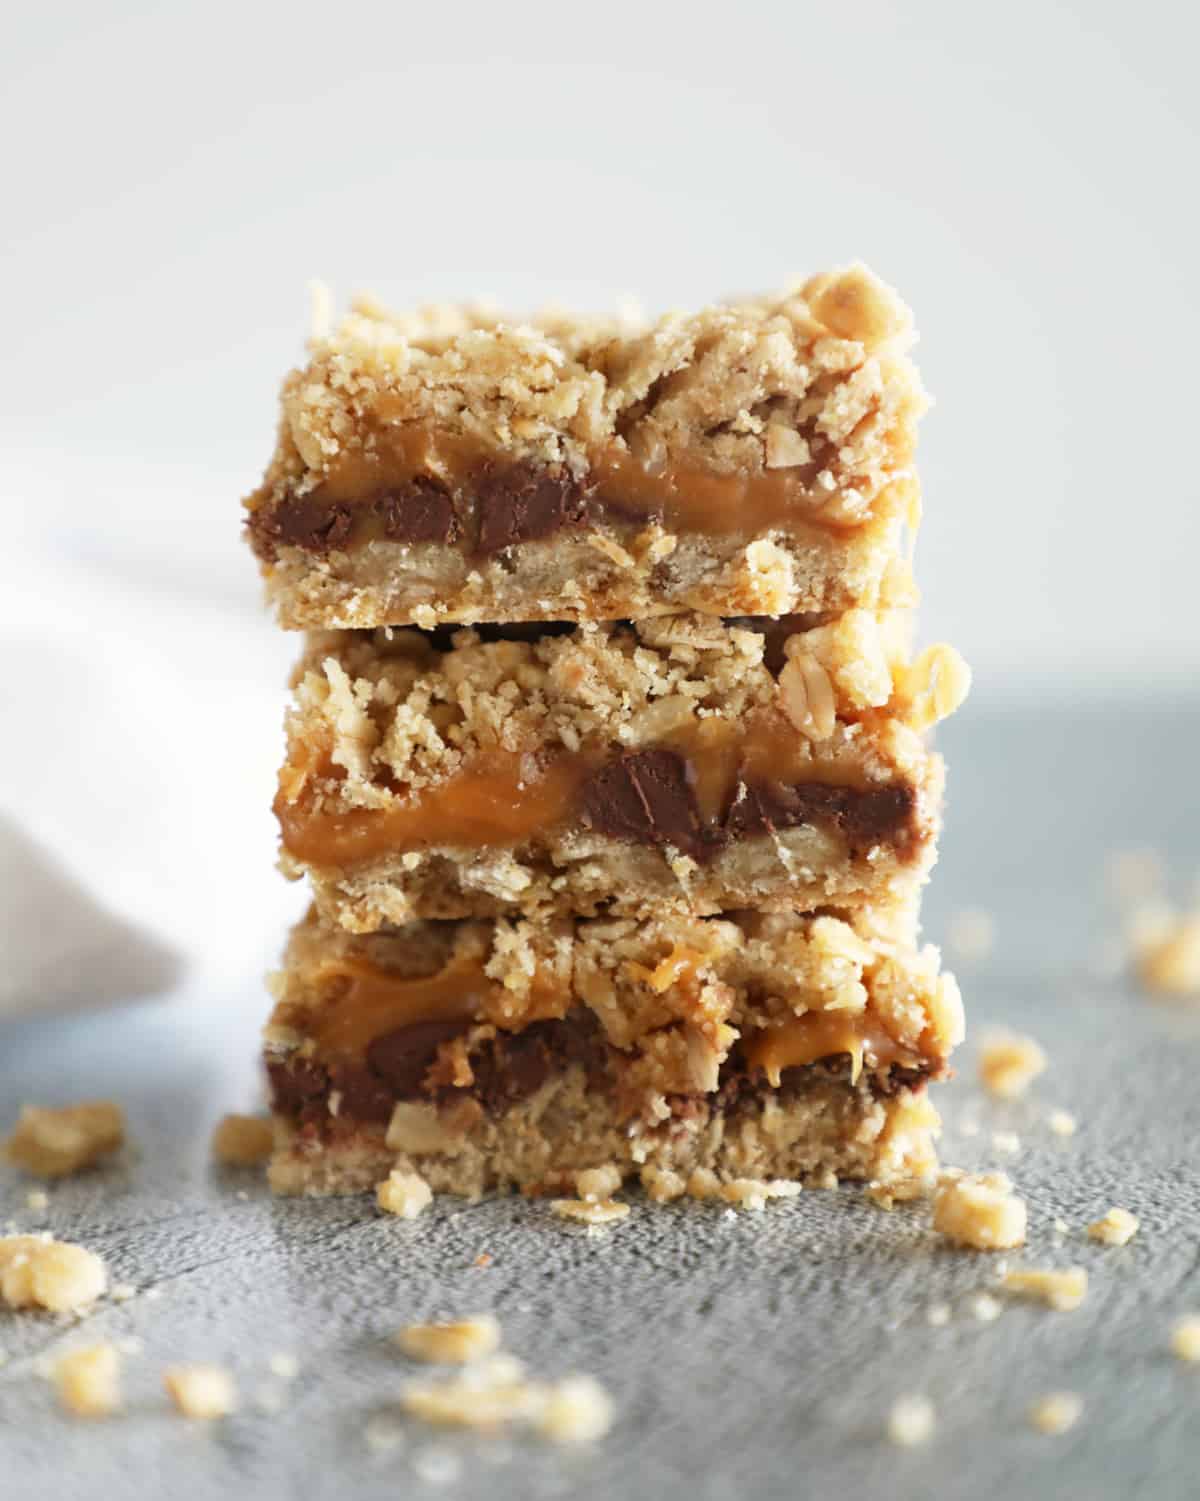 Carmelitas, layered oatmeal chocolate and caramel dessert bars, stacked on top of each other with crumbs surrounding. 